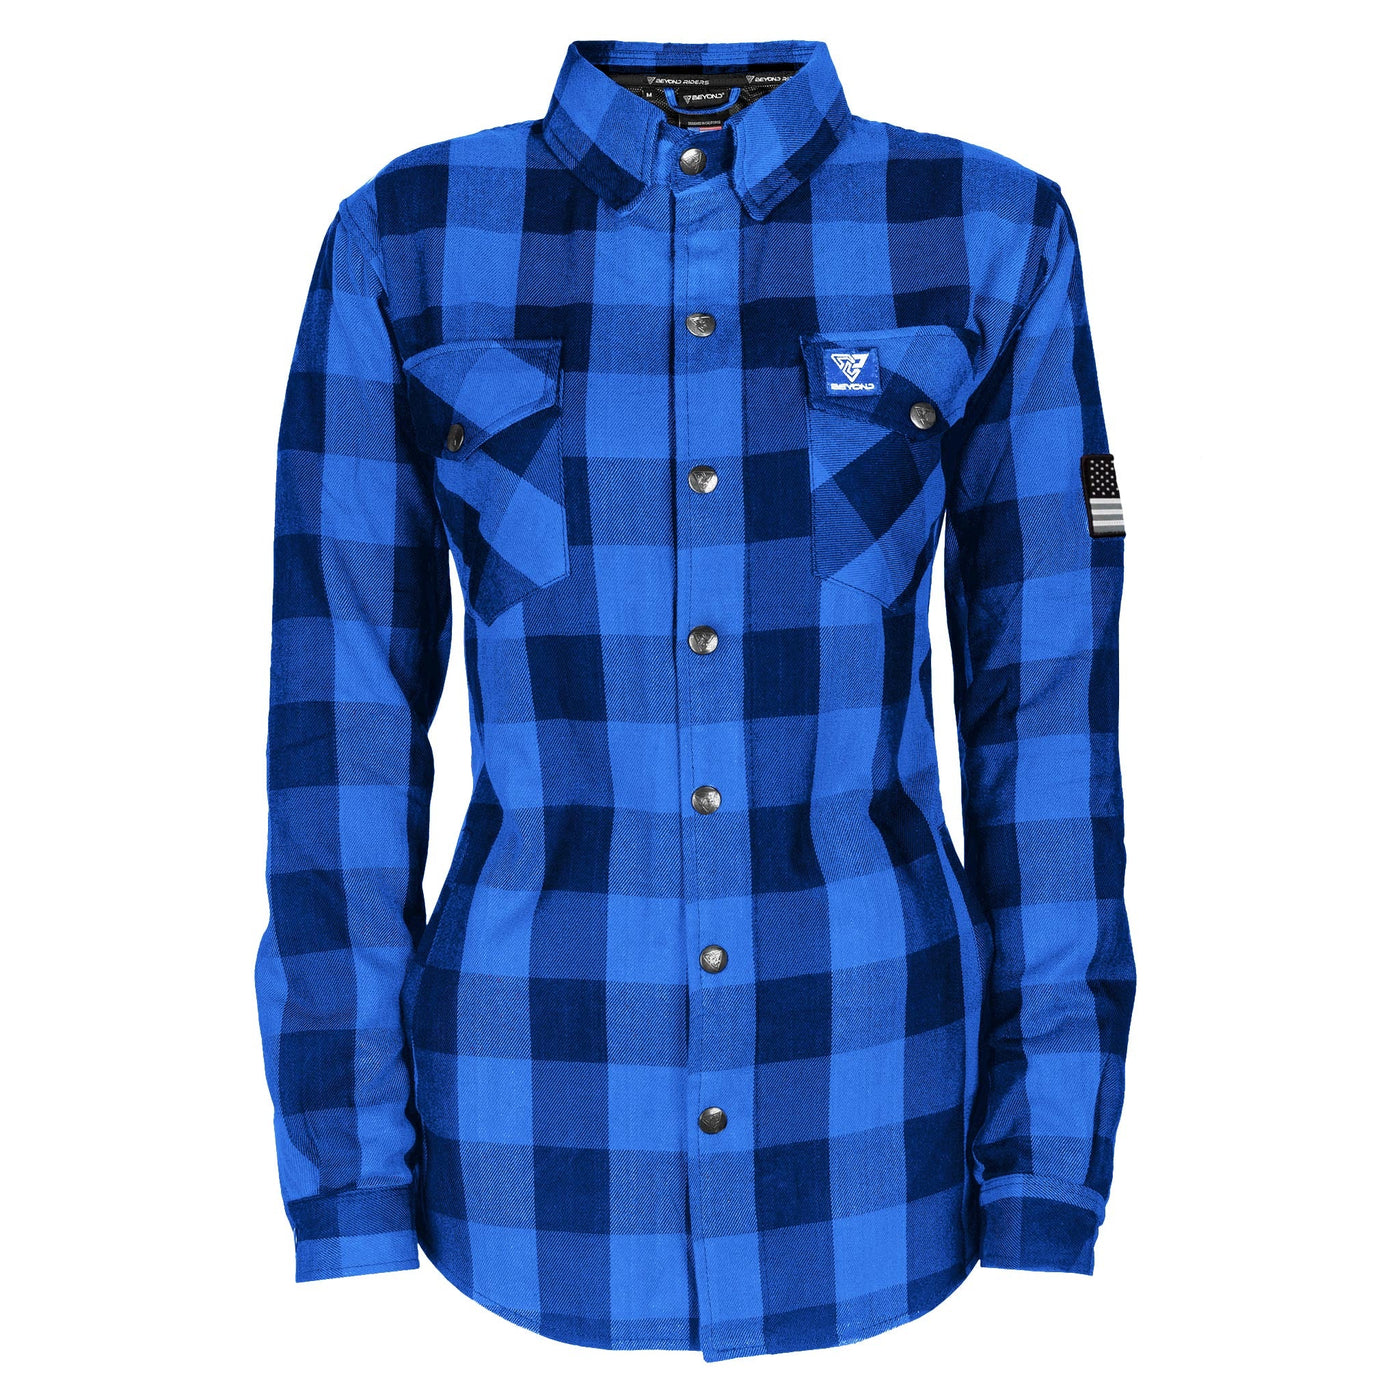 Protective Flannel Shirt with Pads for Women - Blue Checkered